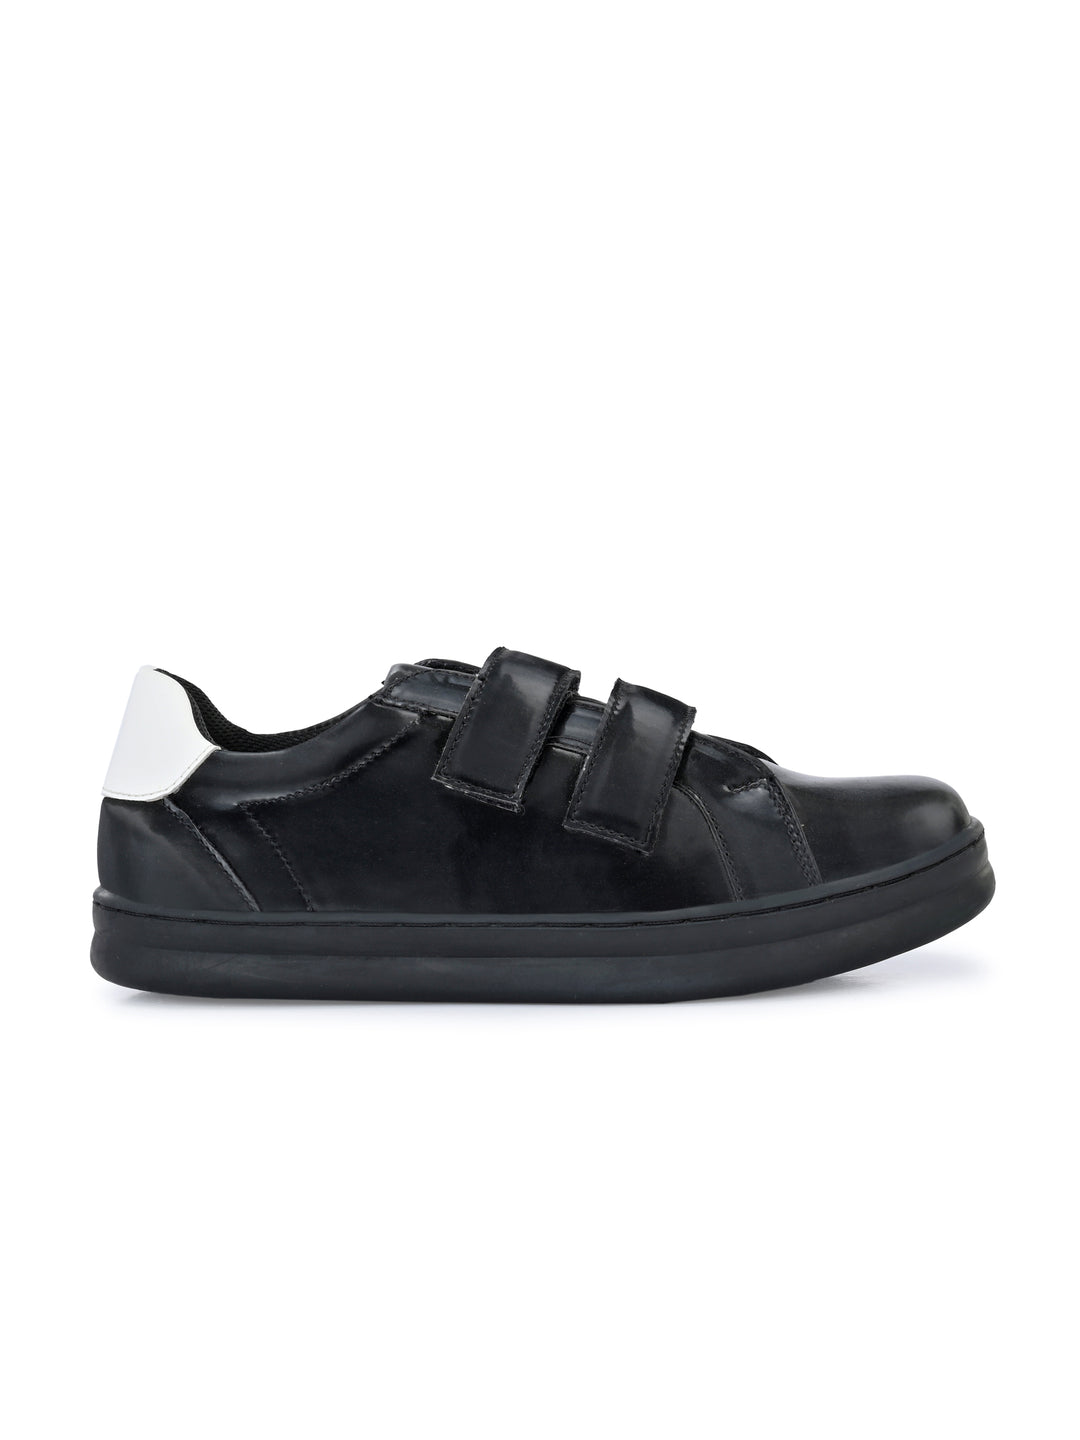 Chloe Black Dual Size Technology Sneakers for Kids